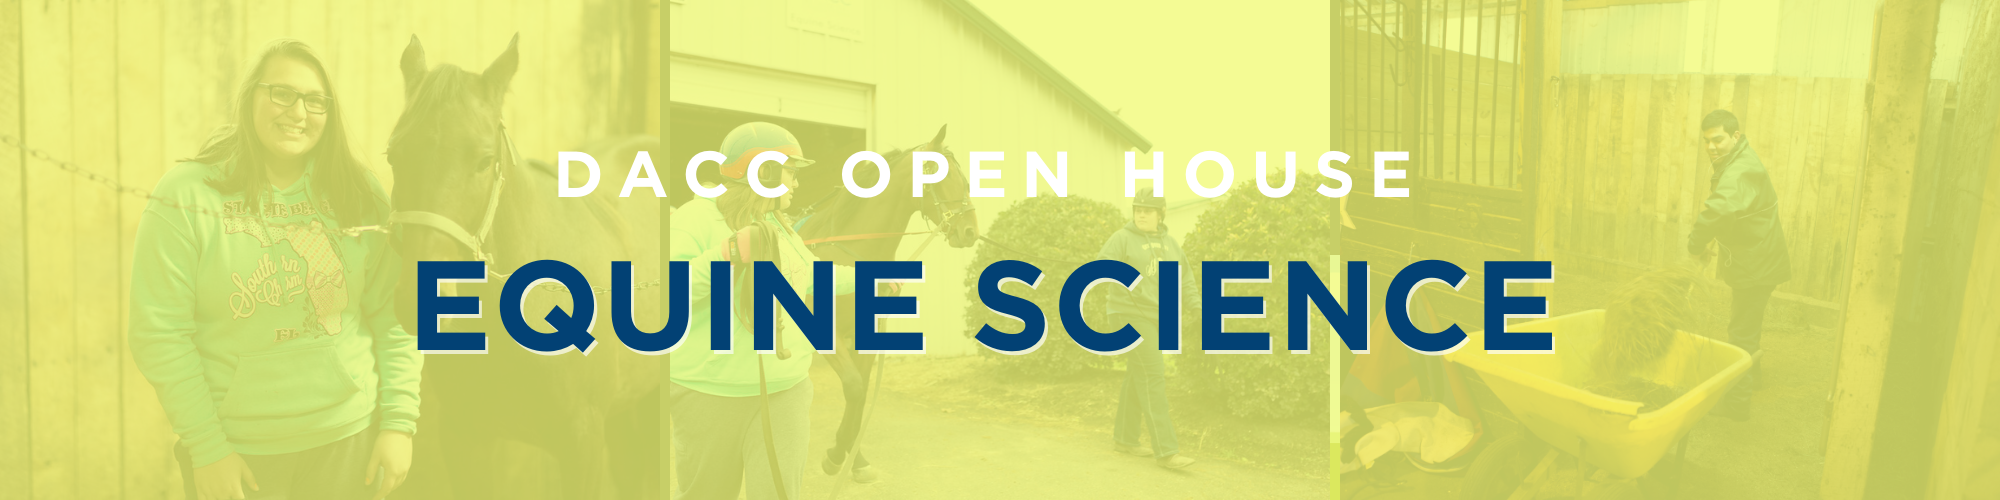 Equine Science Open House Banner